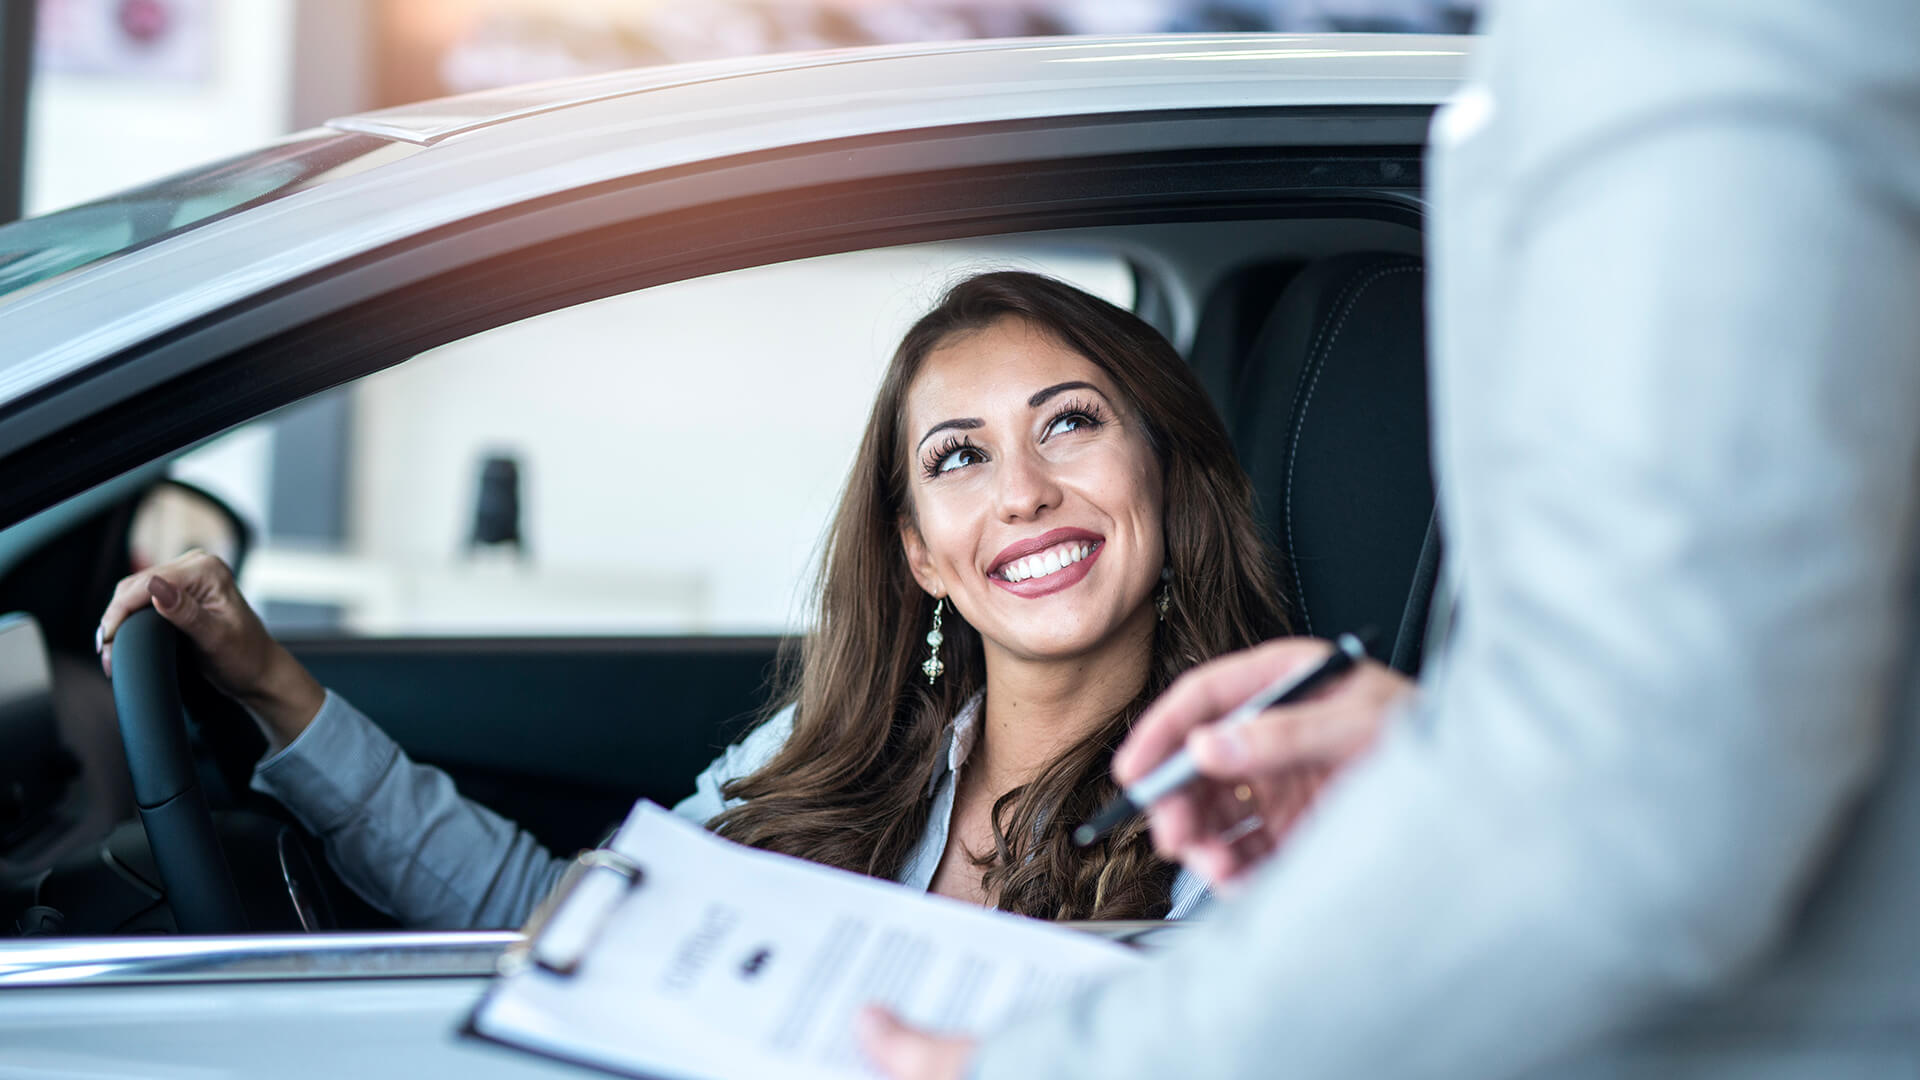 Parking Perspectives: The Importance of Customer Service in Parking